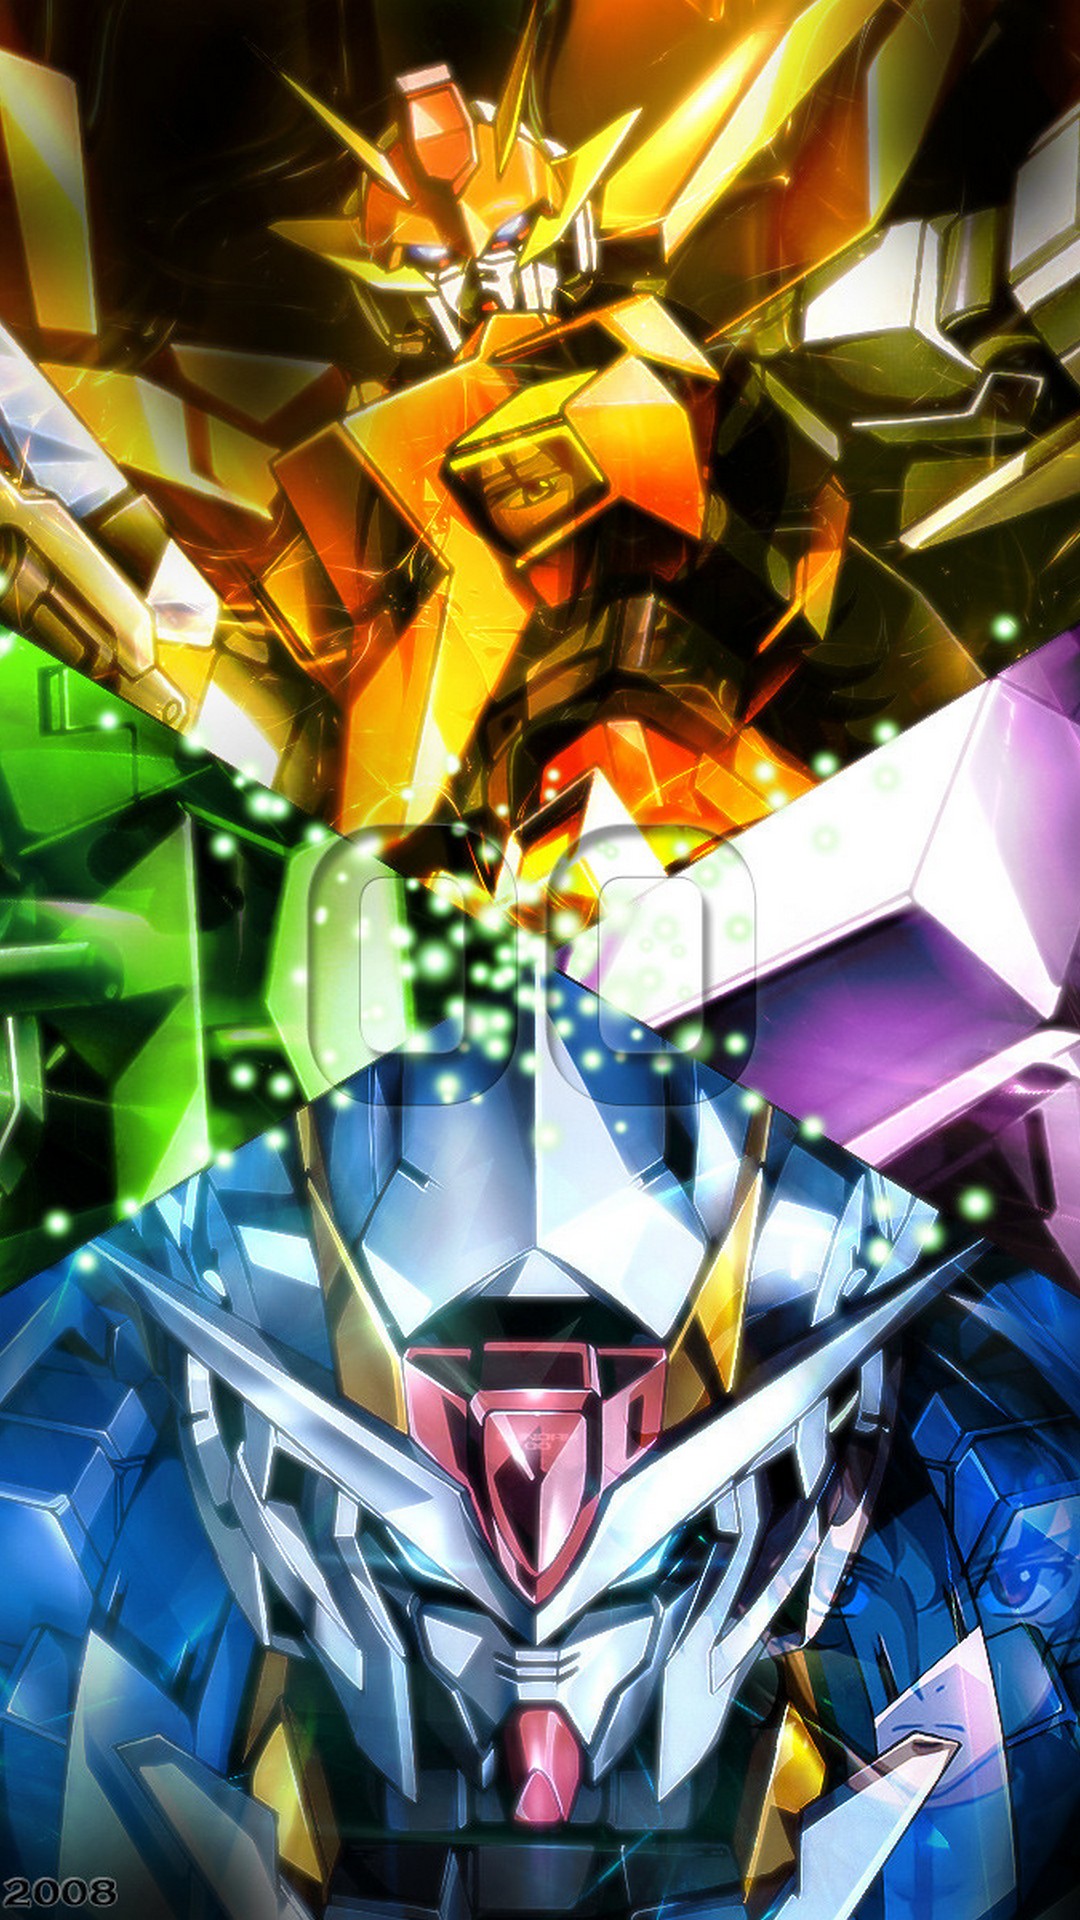 Gundam iPhone 8 Wallpaper With high-resolution 1080X1920 pixel. You can use this wallpaper for your iPhone 5, 6, 7, 8, X, XS, XR backgrounds, Mobile Screensaver, or iPad Lock Screen